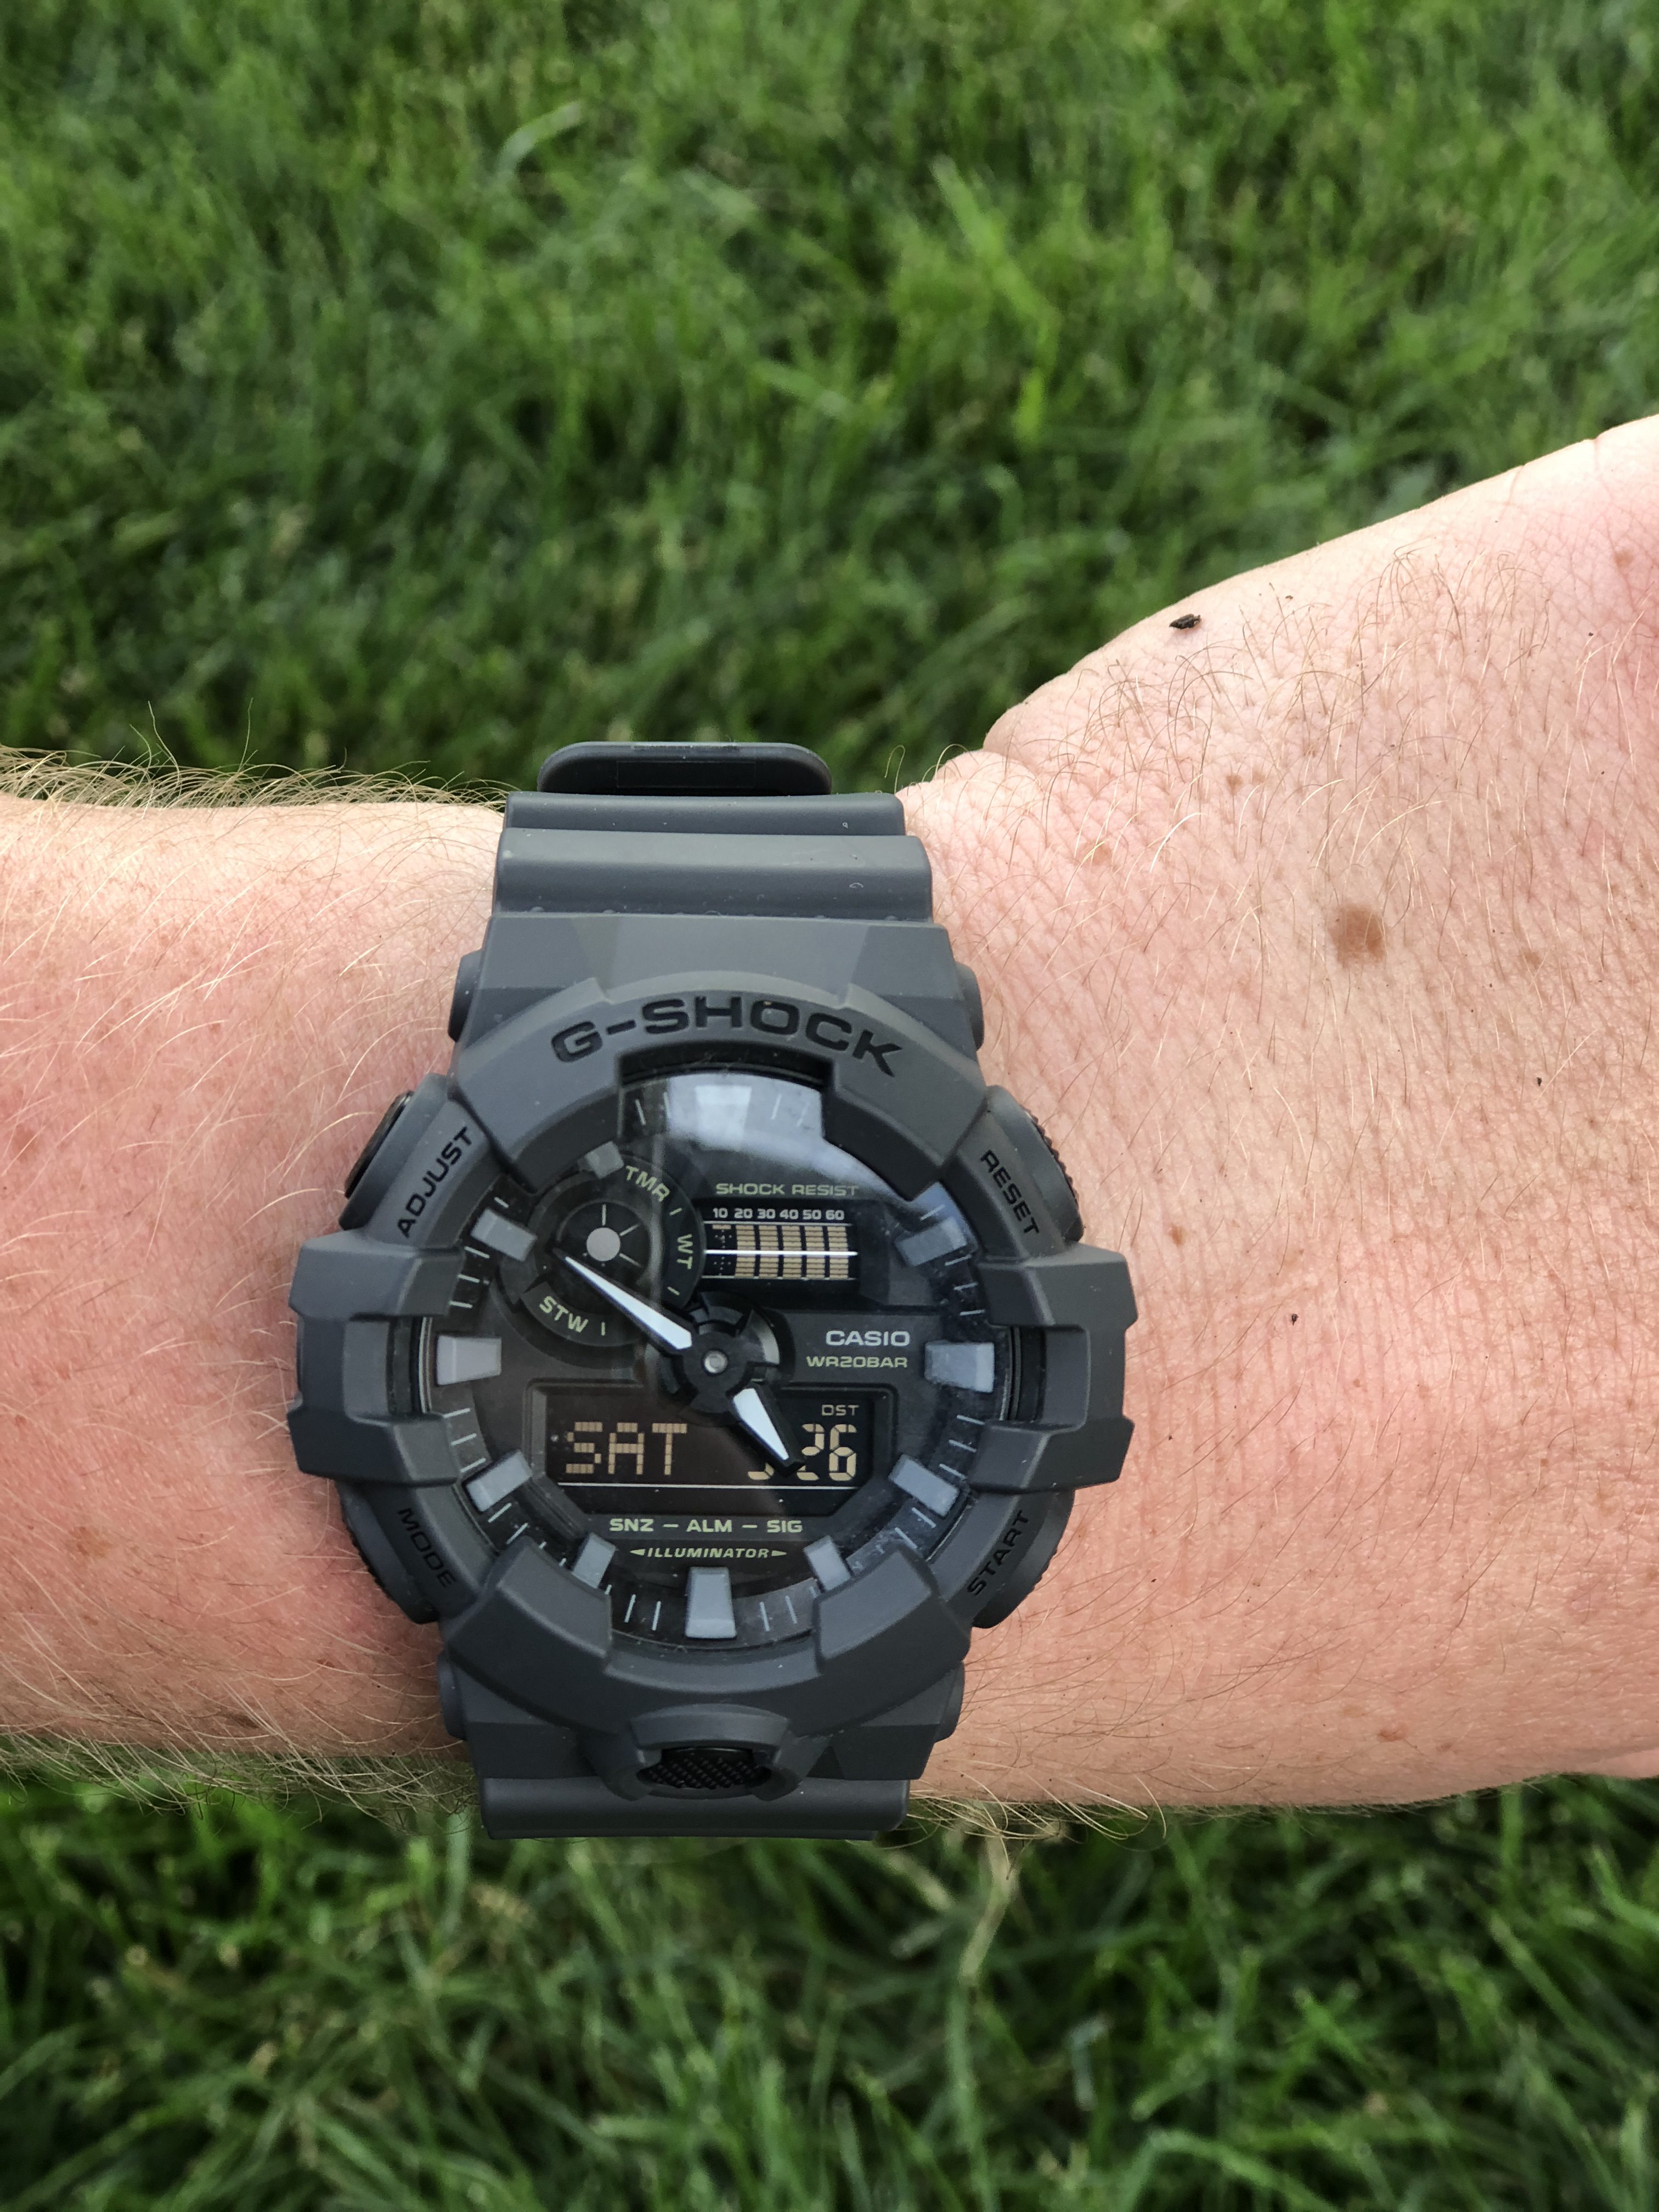 Awesome gift ideas for the officer that has everything | #fathersday | #proudpolicewife | #gshock |#giftideas | #policeofficer